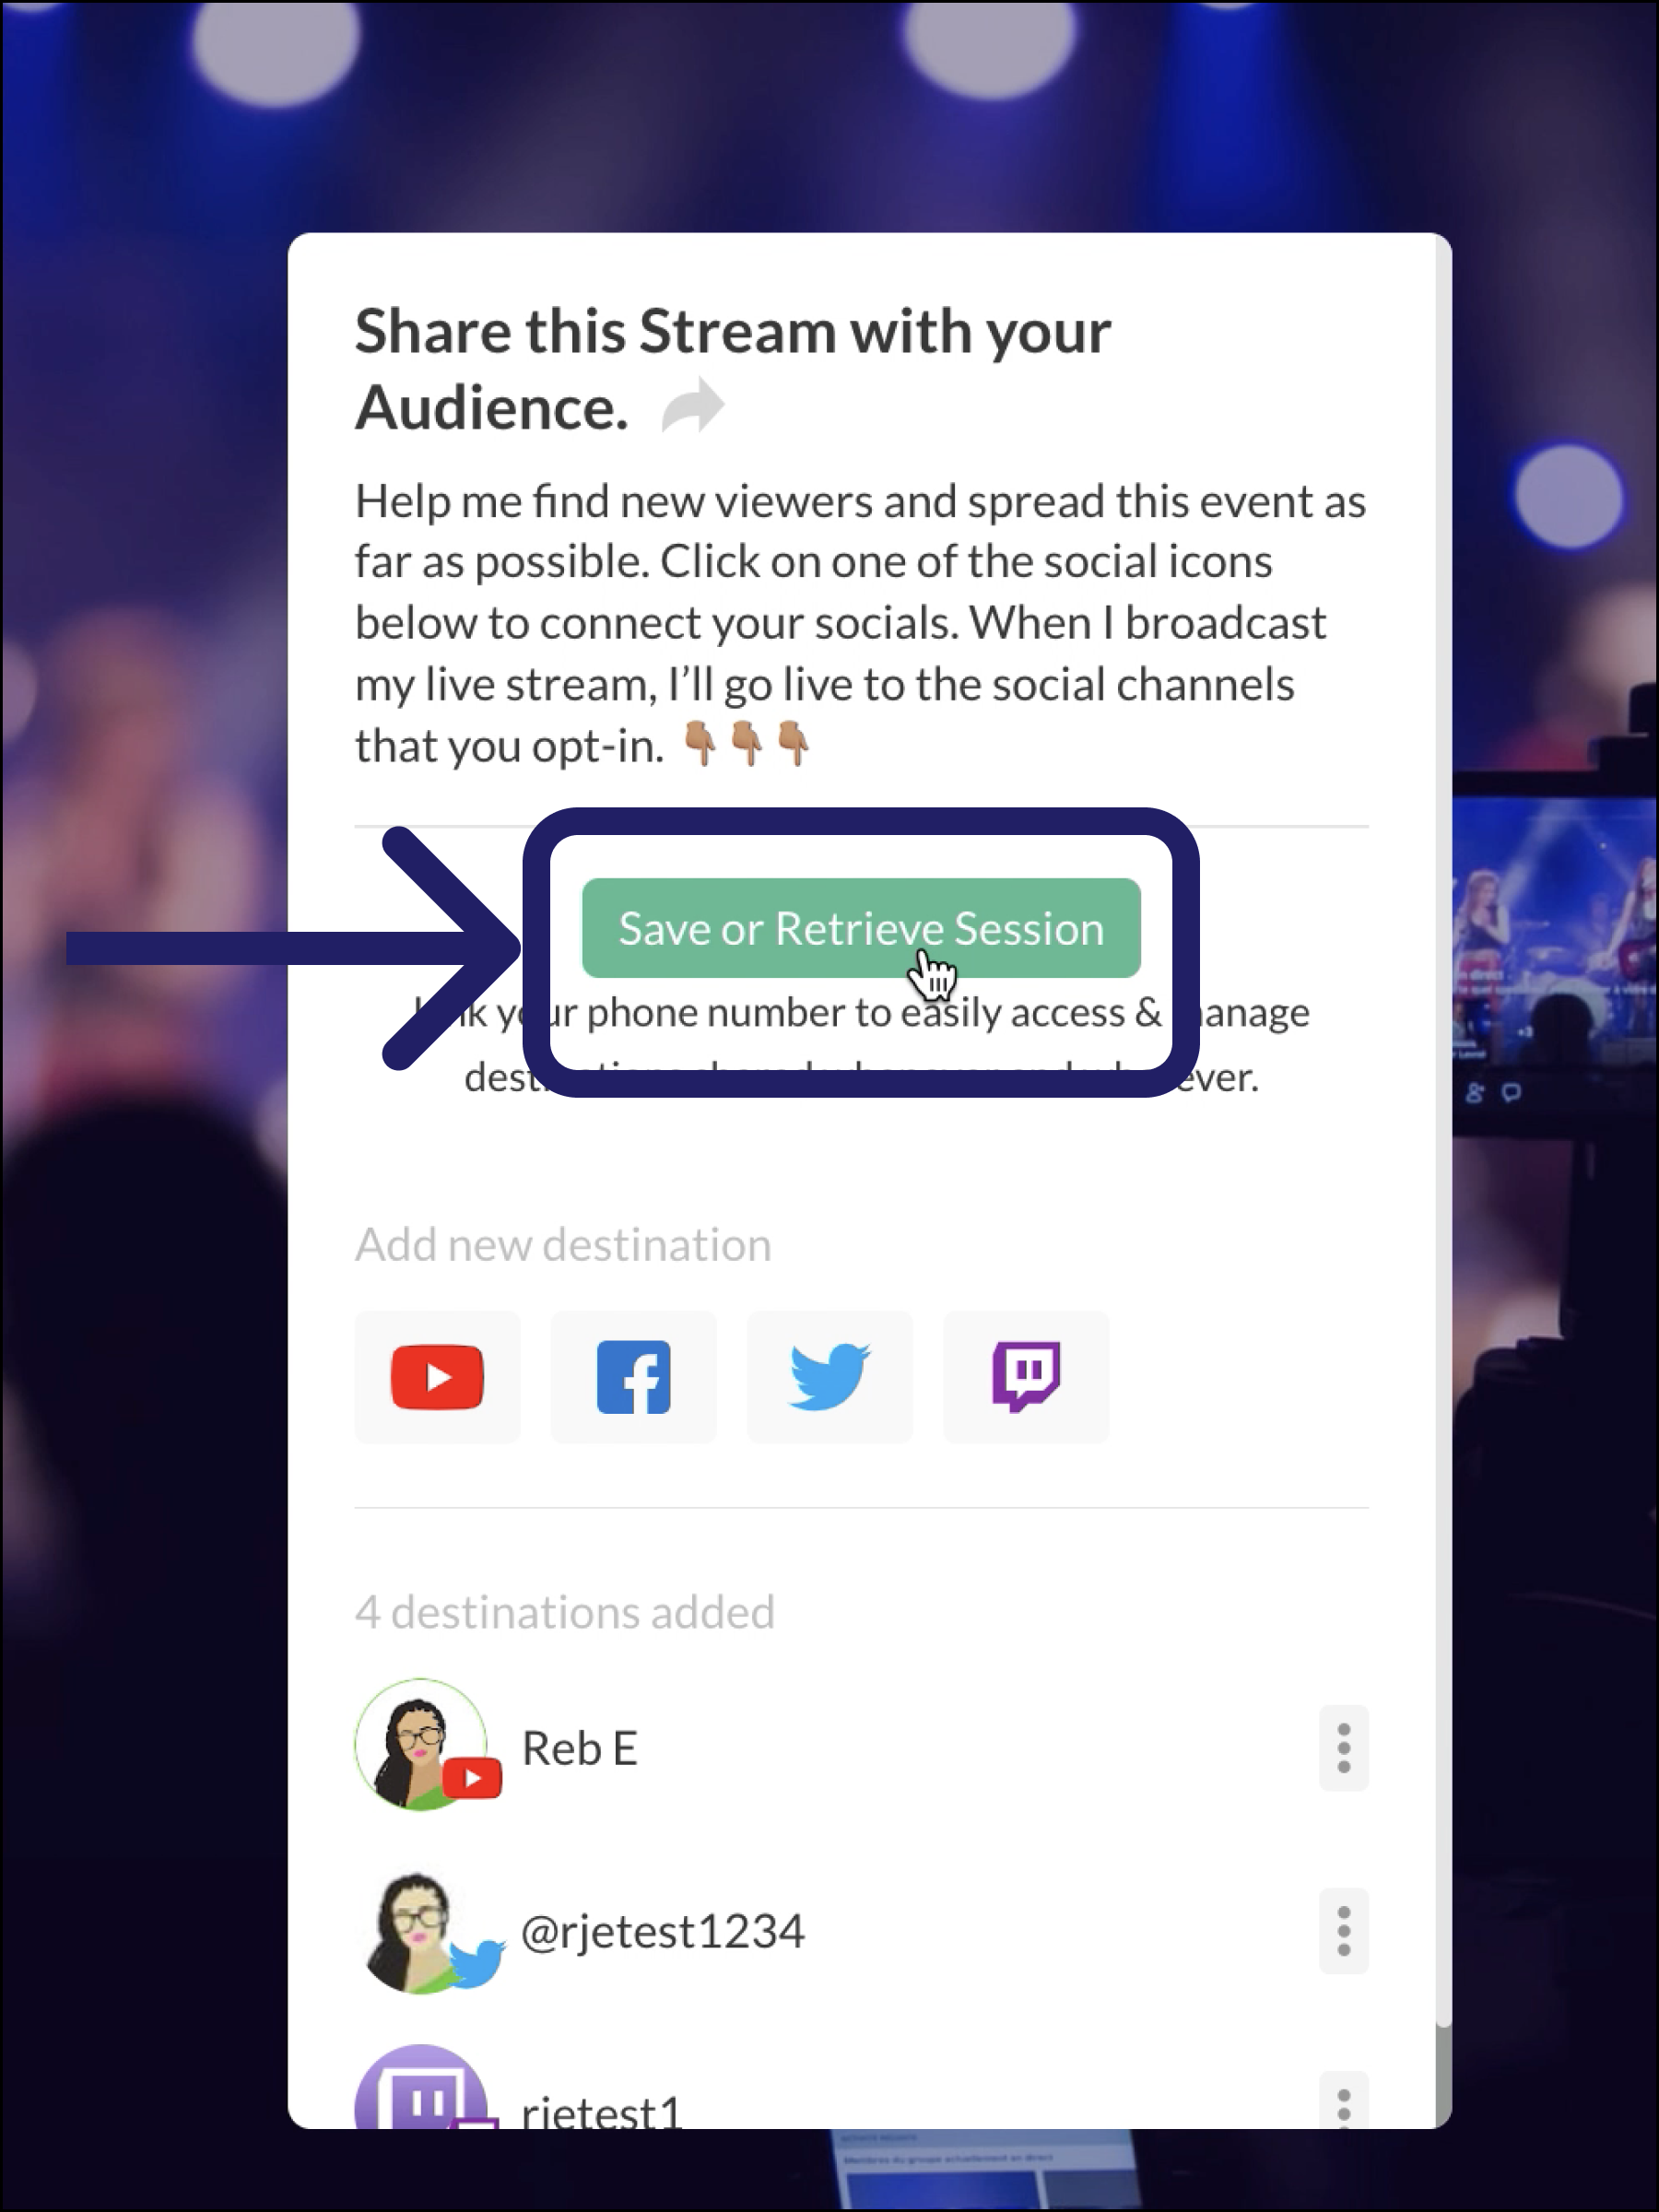 StreamShare_-Retrieve-Session-01.png